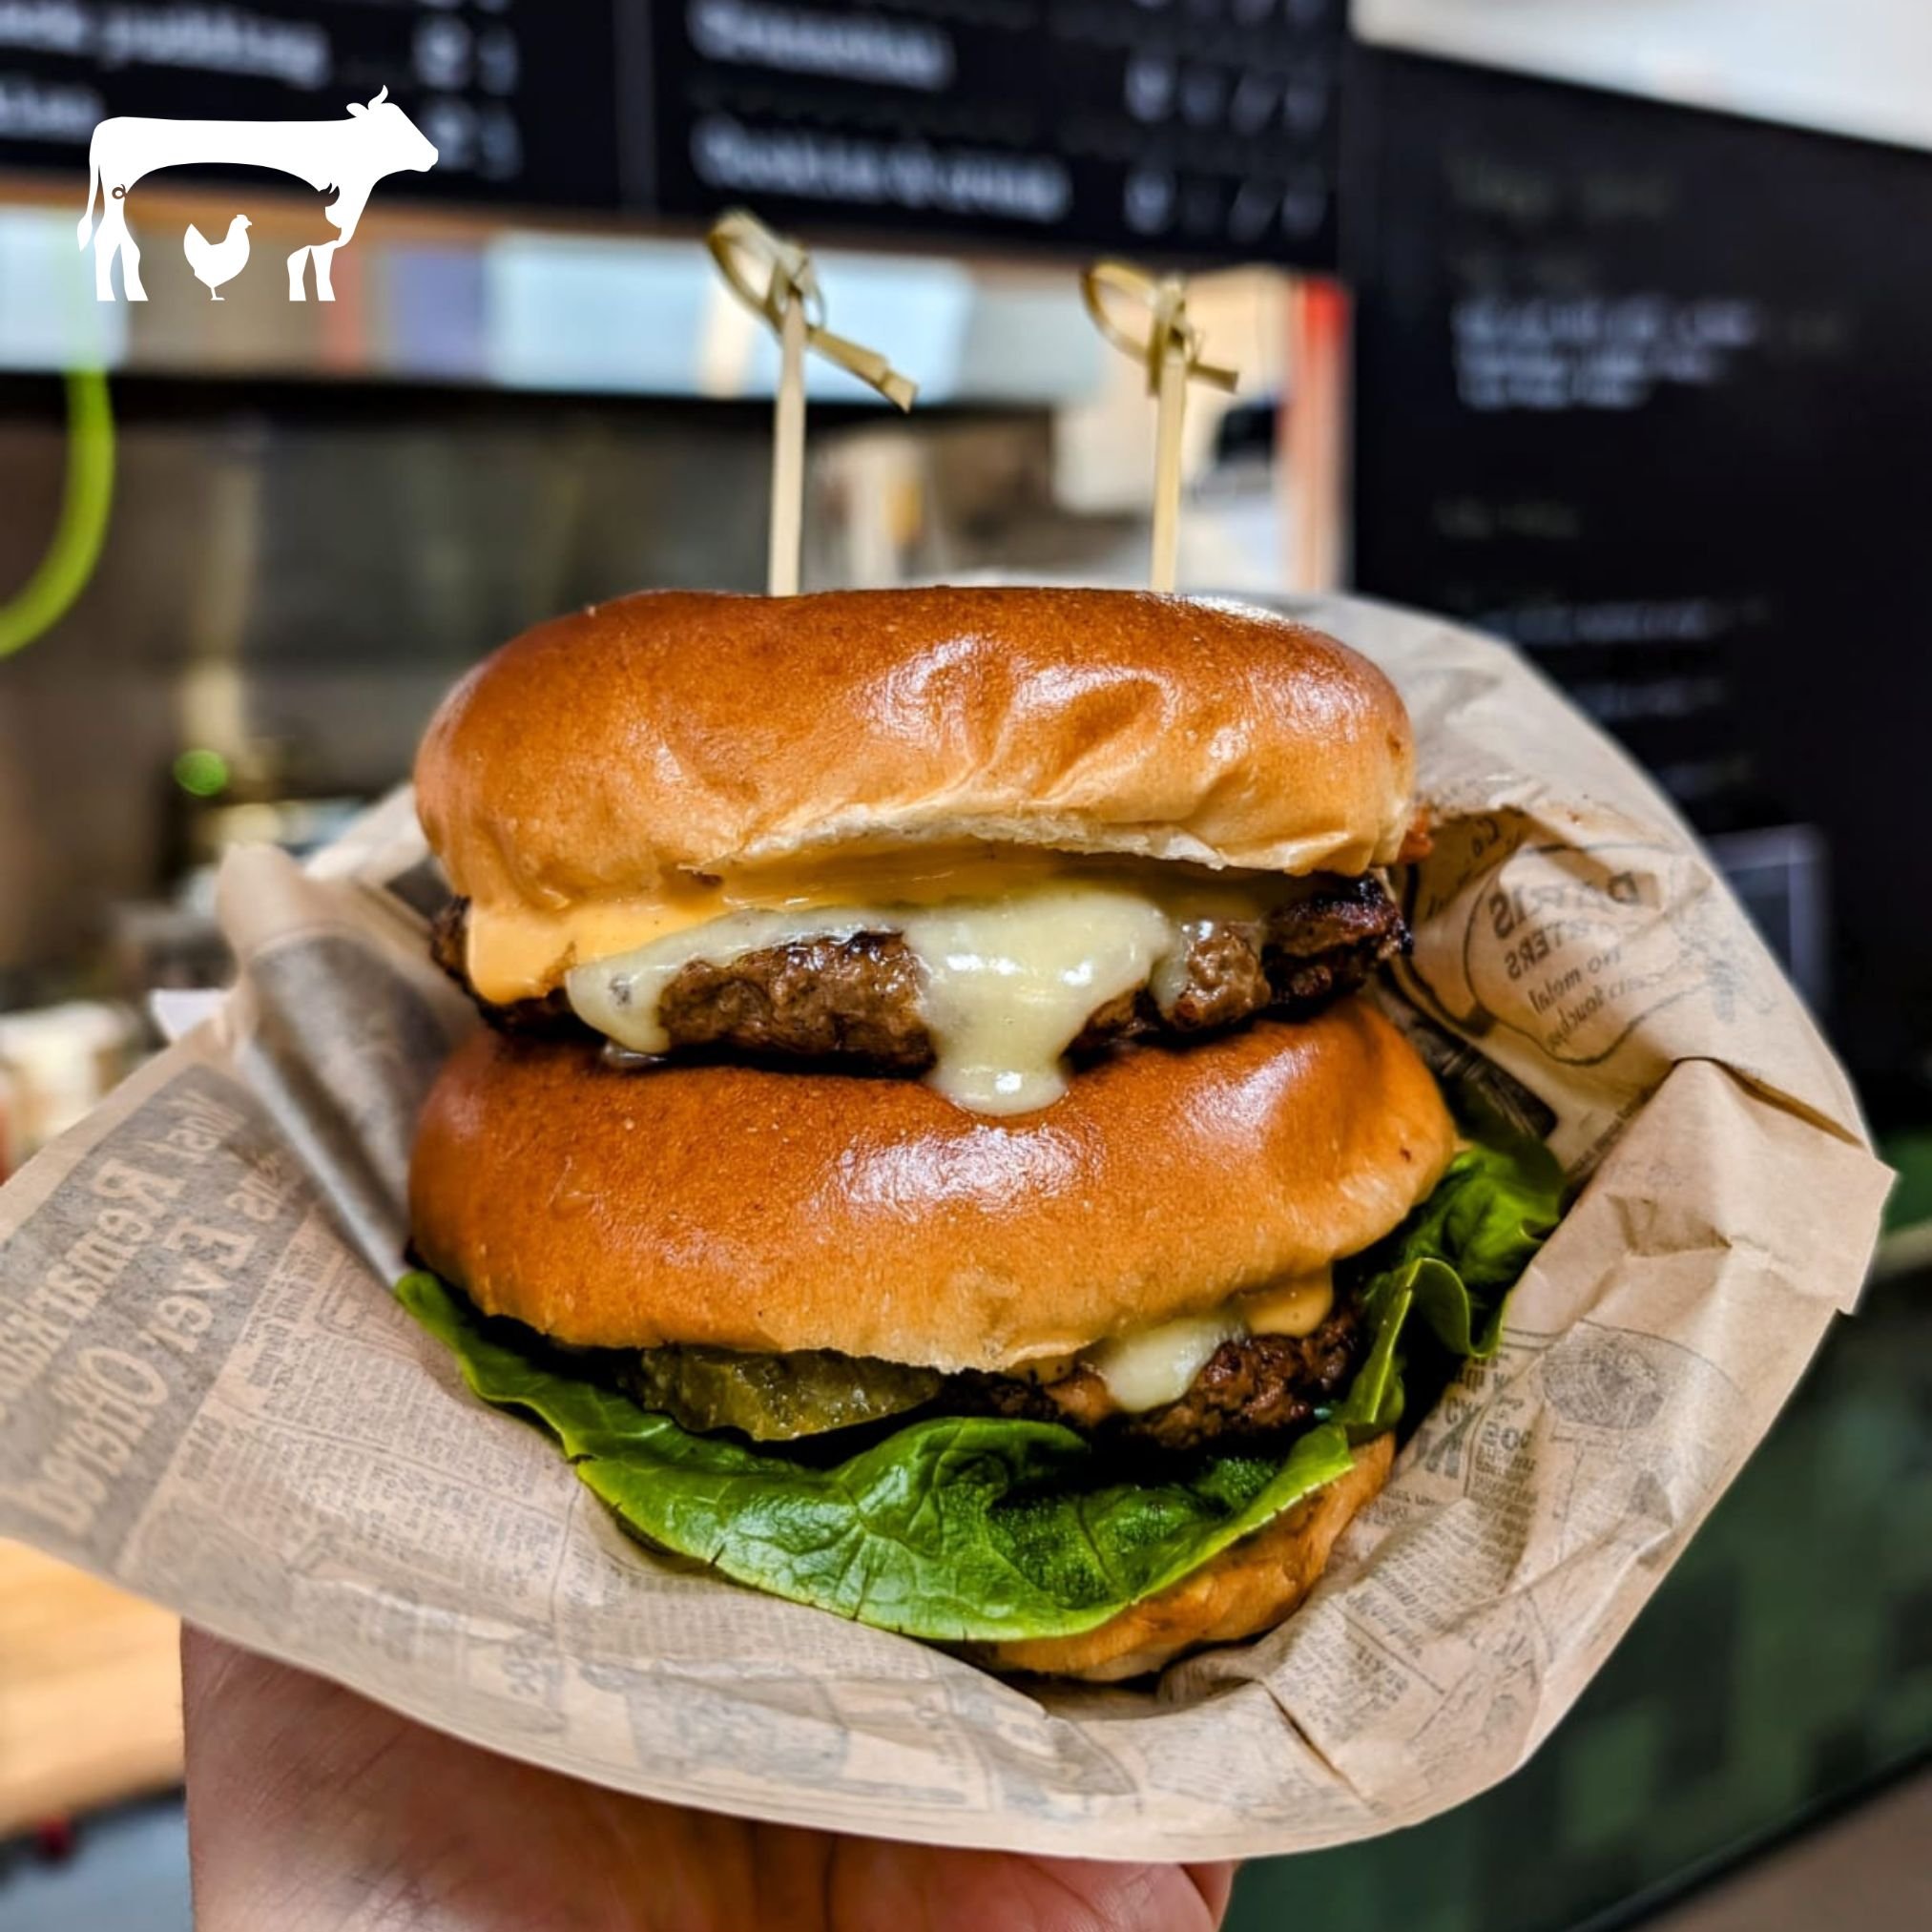 Are you tempted? 🙋🙋&zwj;♀️🙋&zwj;♂️
🍔
Introducing the Big MACkay! 
🍔
One of this week's specials, named in honour of our very own burger master Ryan Mackay. 
🍔
Can you handle it? - 2x Handmade beef patties, double bread, cheddar, burger sauce, p